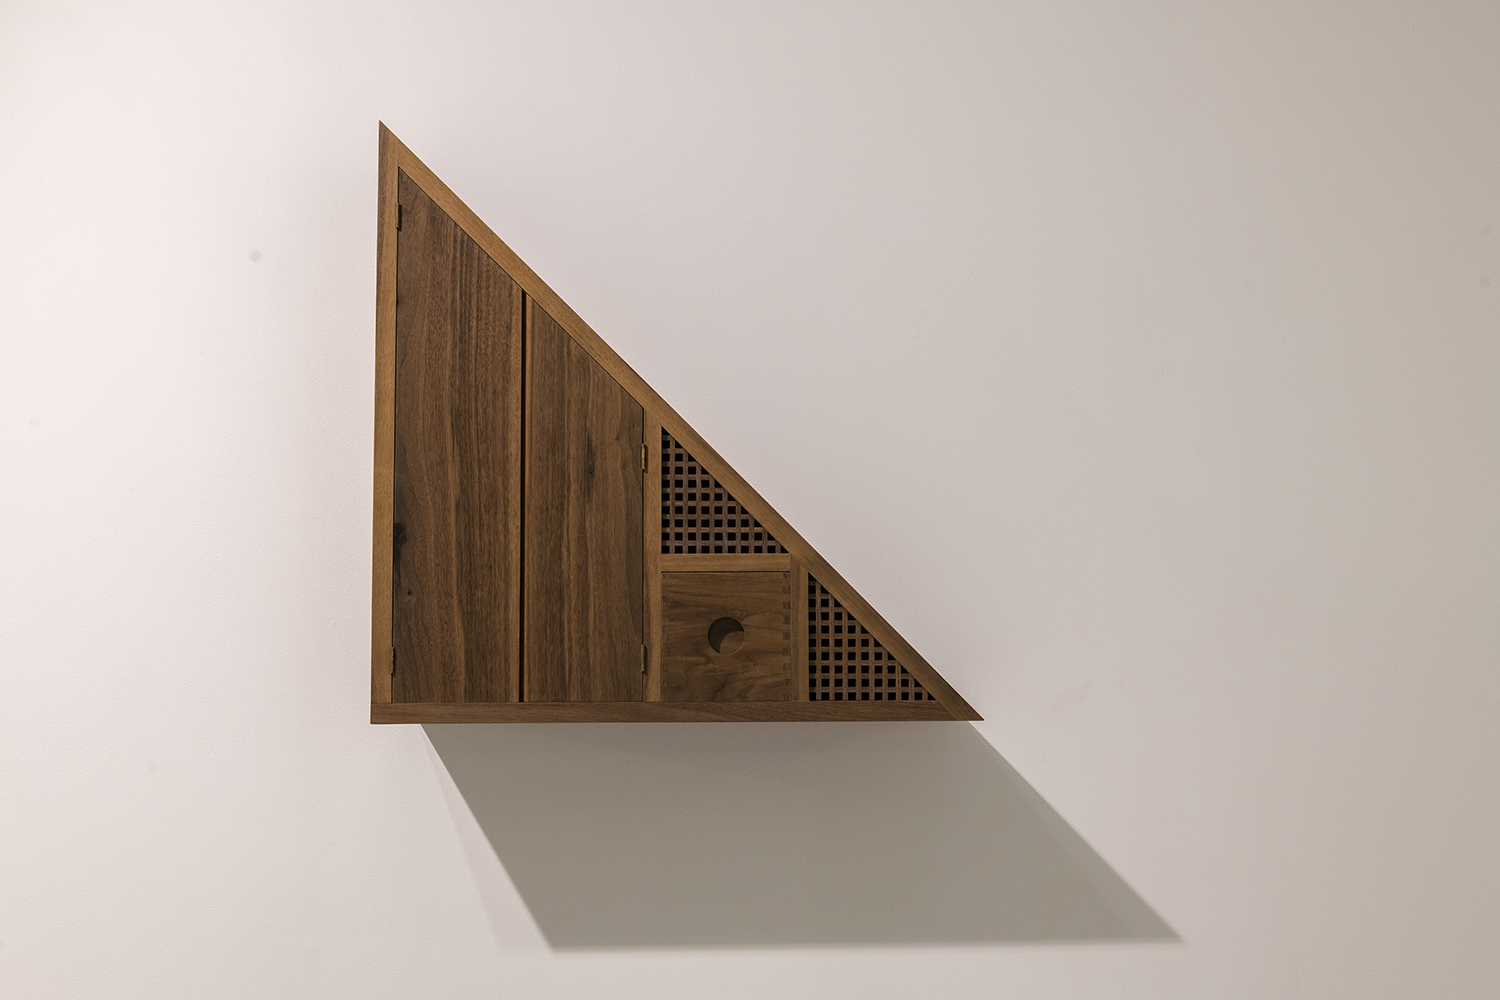 A triangular shaped wooden design mounted on a wall.